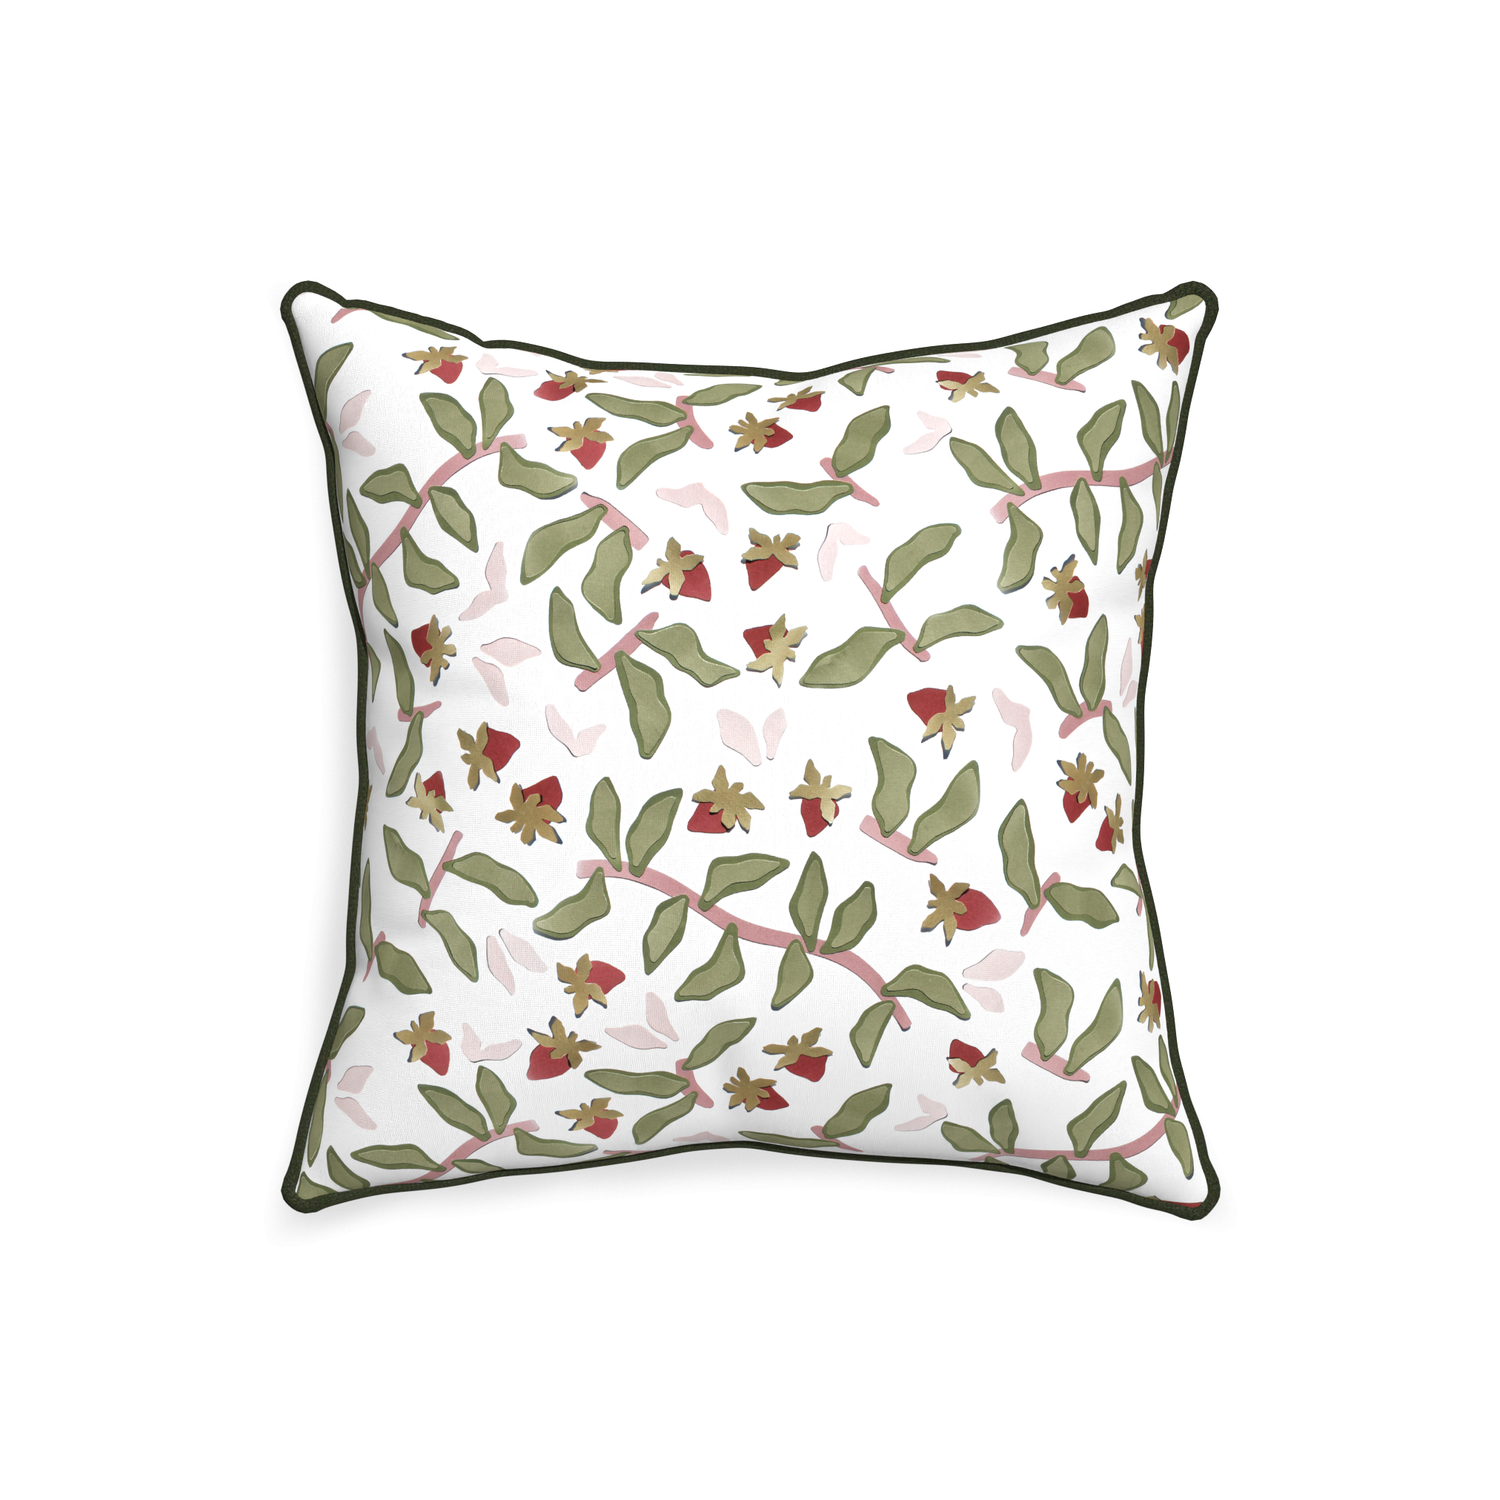 20-square nellie custom strawberry & botanicalpillow with f piping on white background